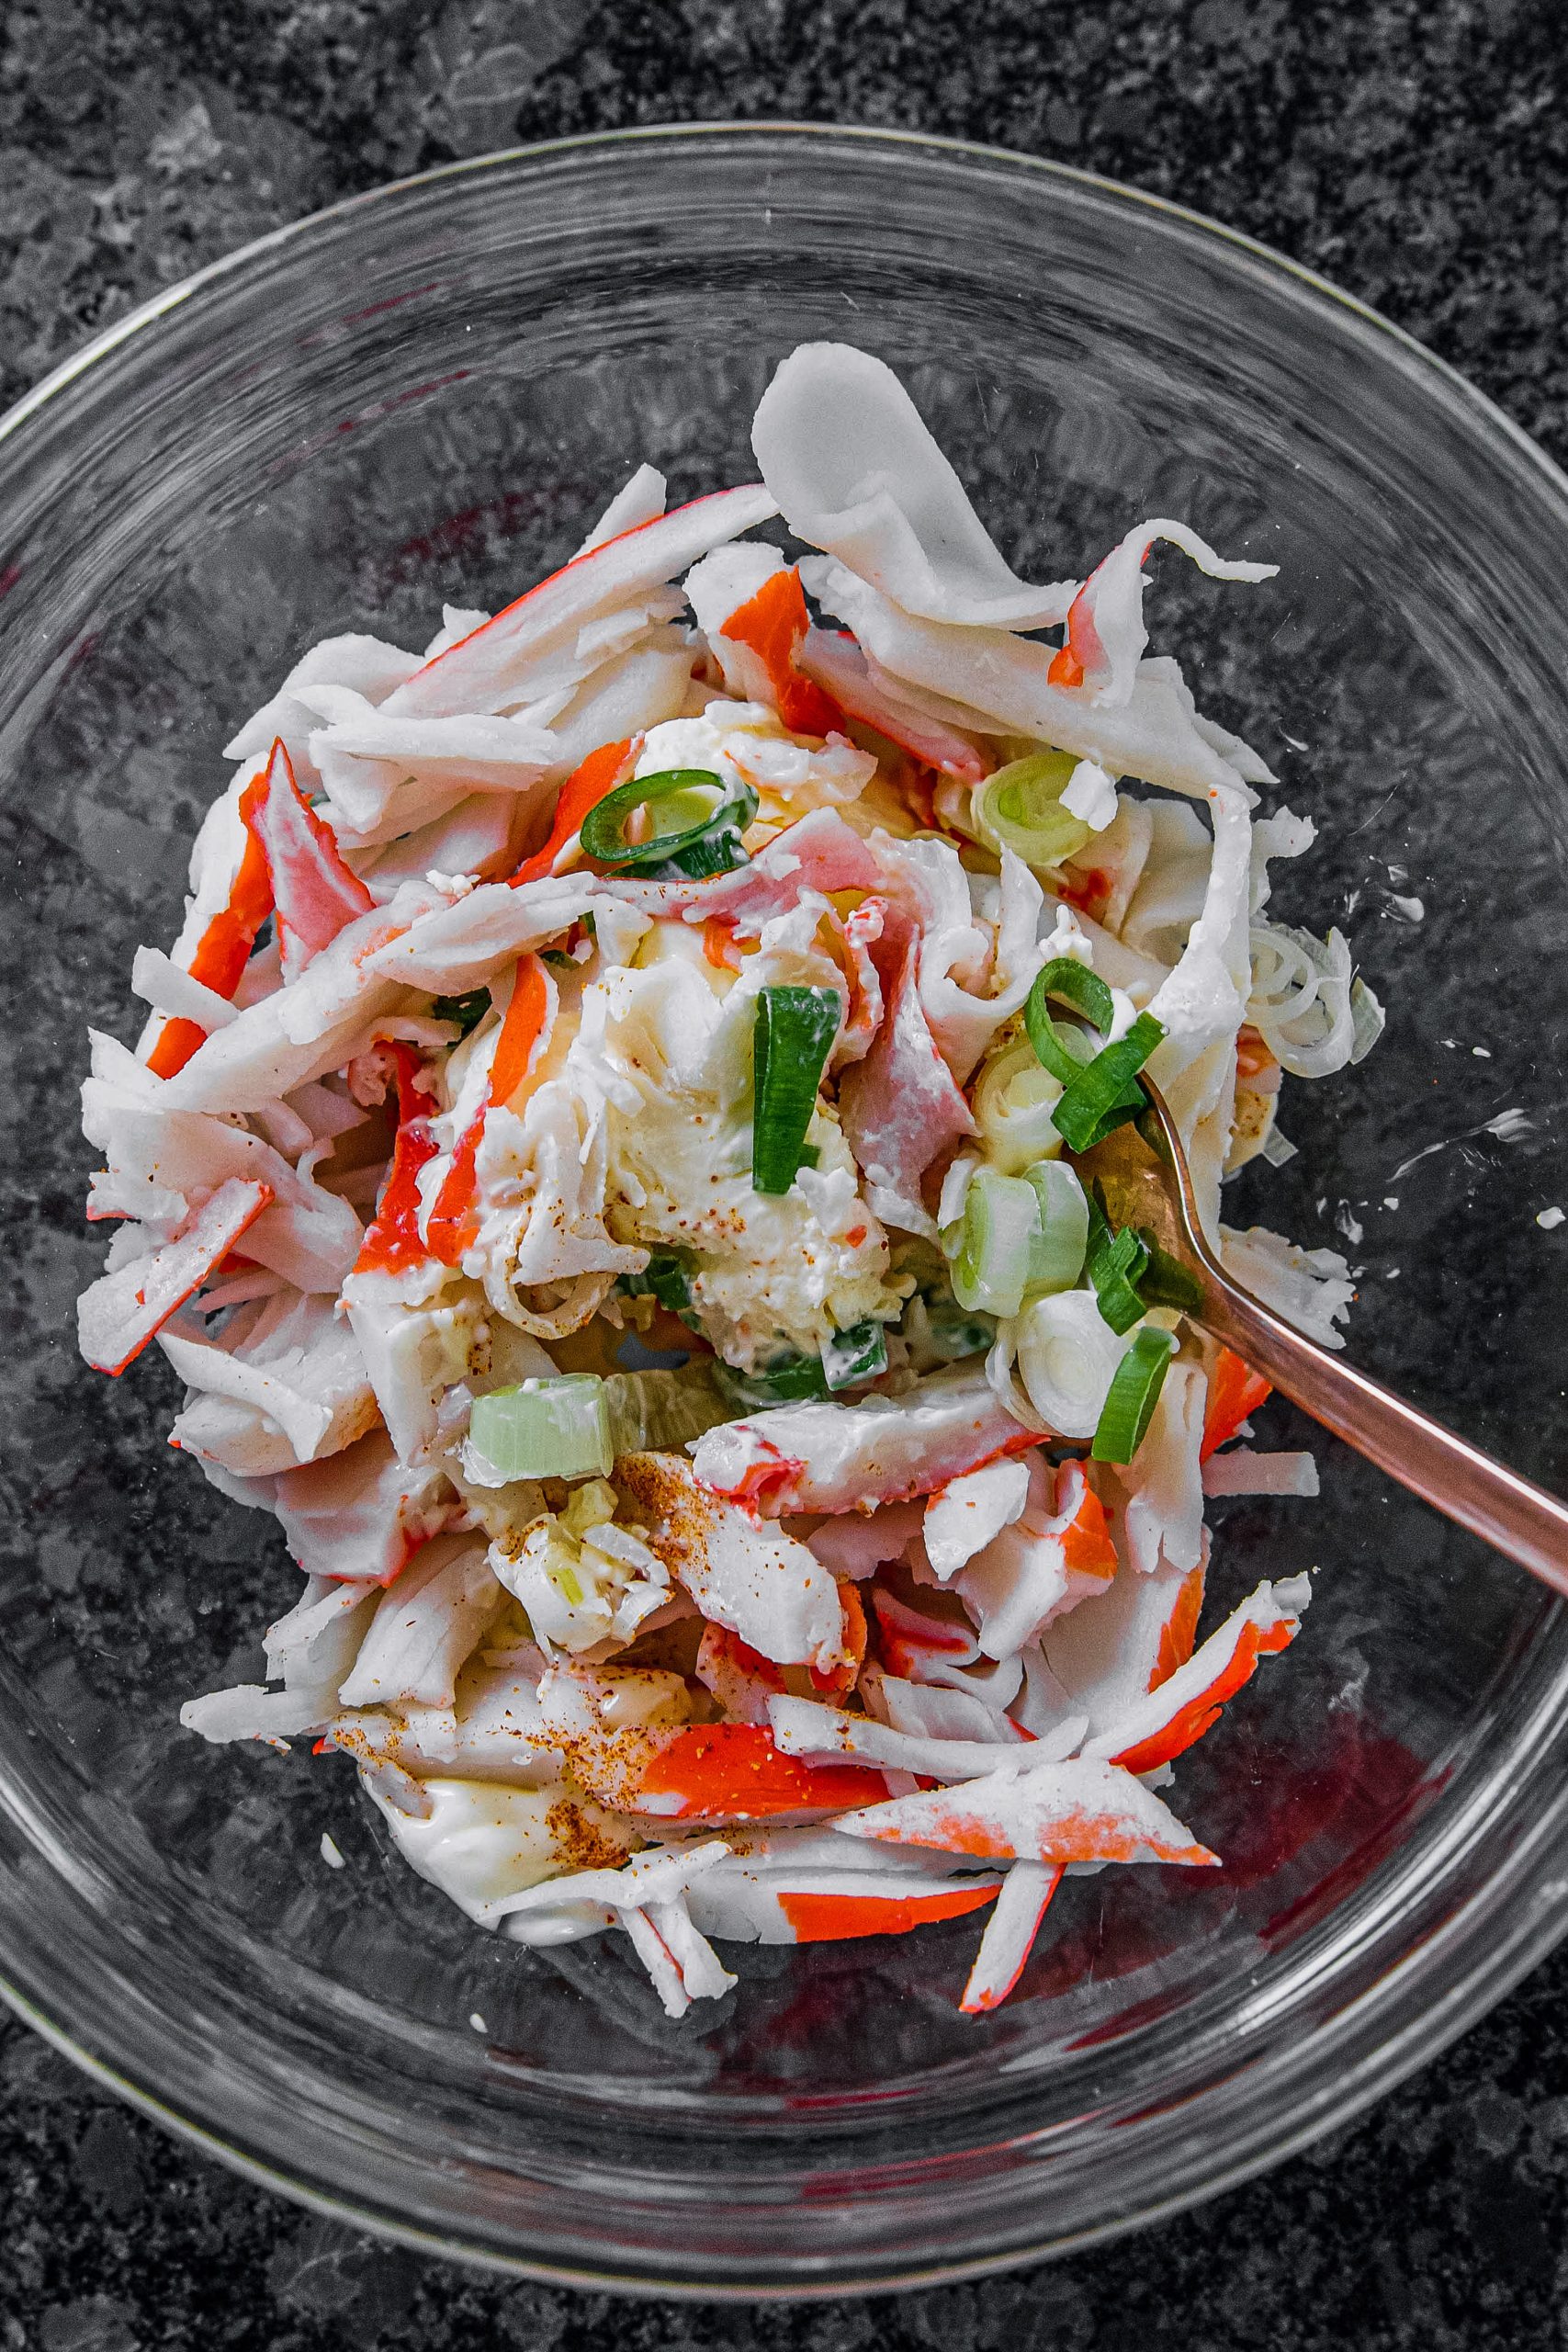 Mix the cream cheese, mayonnaise, and crabmeat in a bowl. Add the onion and the red pepper.